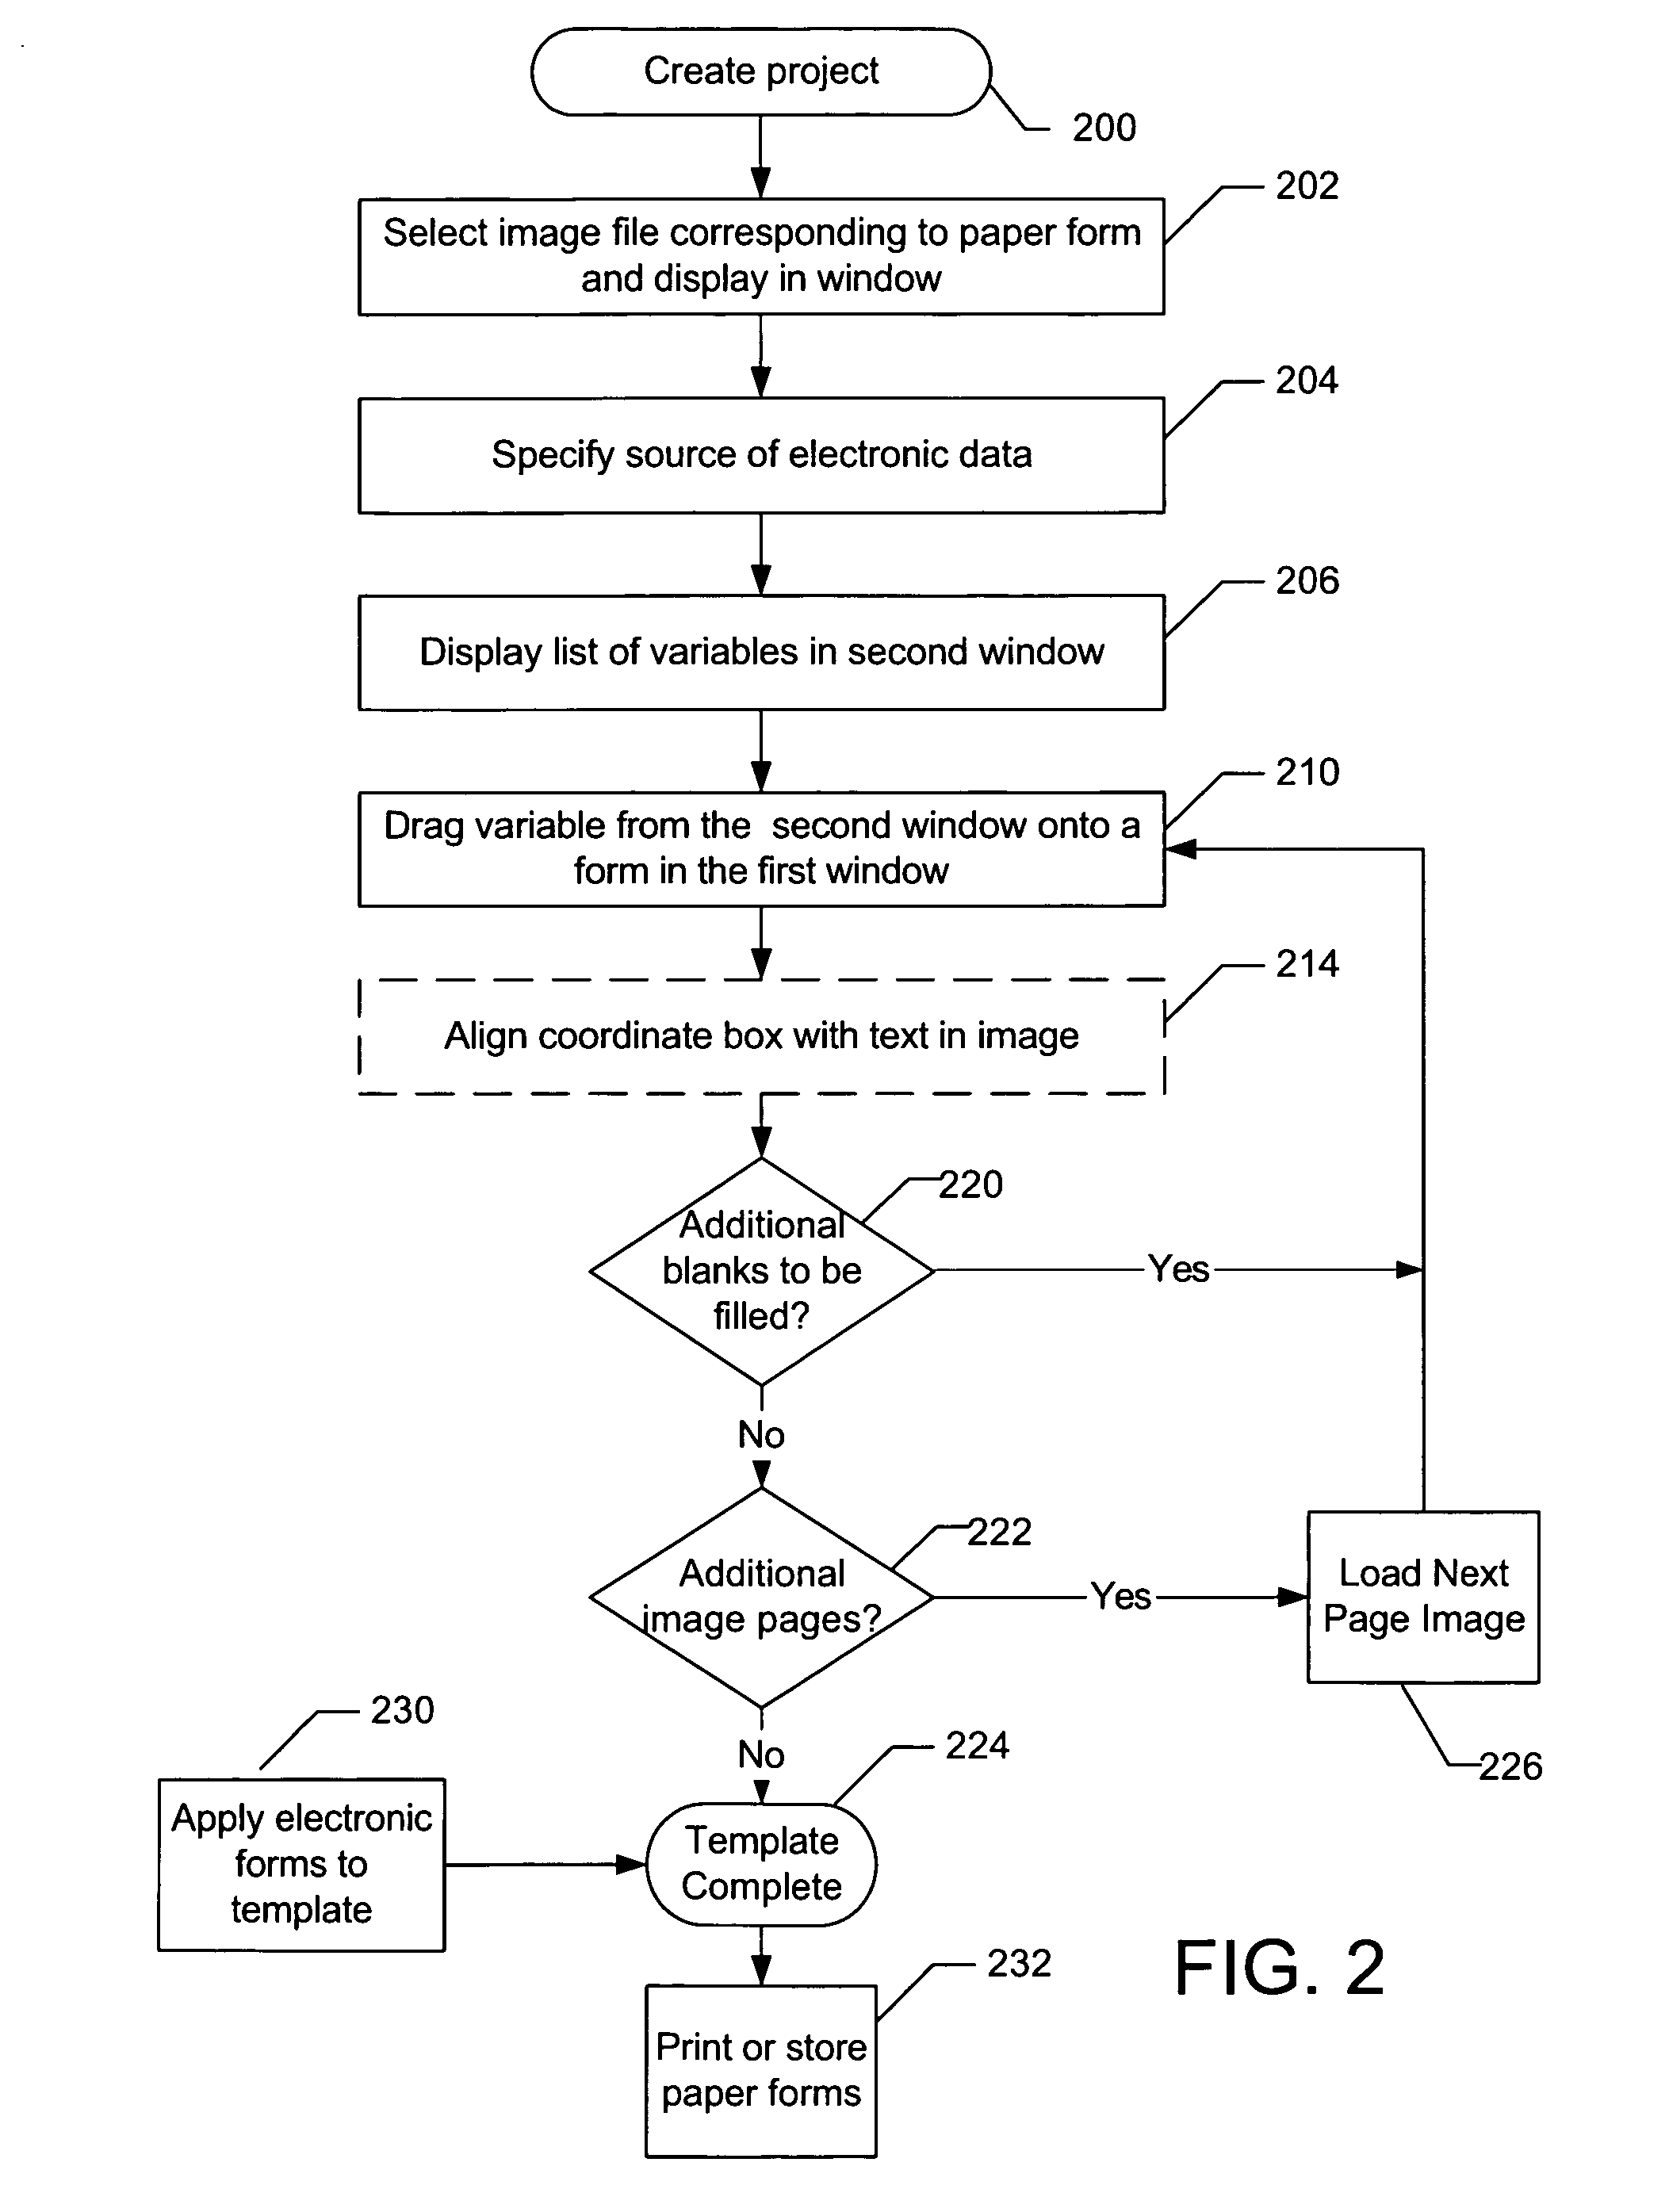 System for describing the overlaying of electronic data onto an electronic image